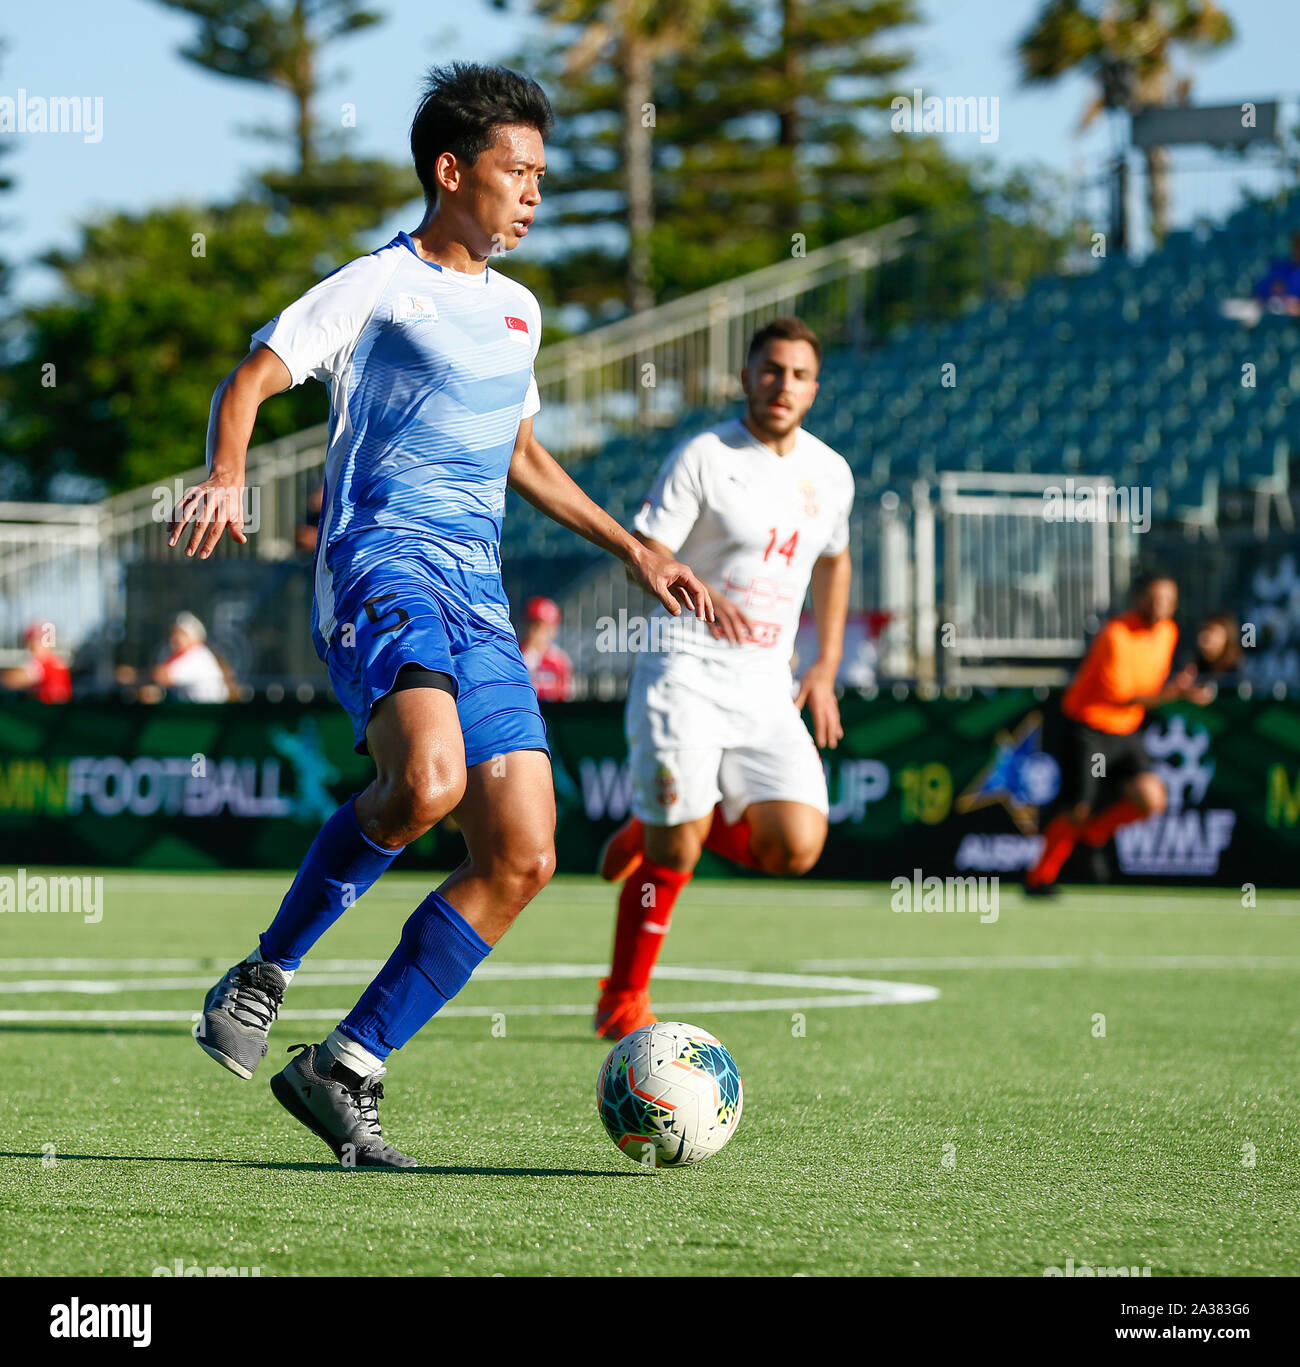 Langley Park, Perth, Australia. 6th Oct 2019. World Mini Football Federation World Cup; Serbia versus Singapore, Boon Keat Luis Lim of Singapore runs the ball into the Serbian half - Editorial Use Credit: Action Plus Sports Images/Alamy Live News Stock Photo